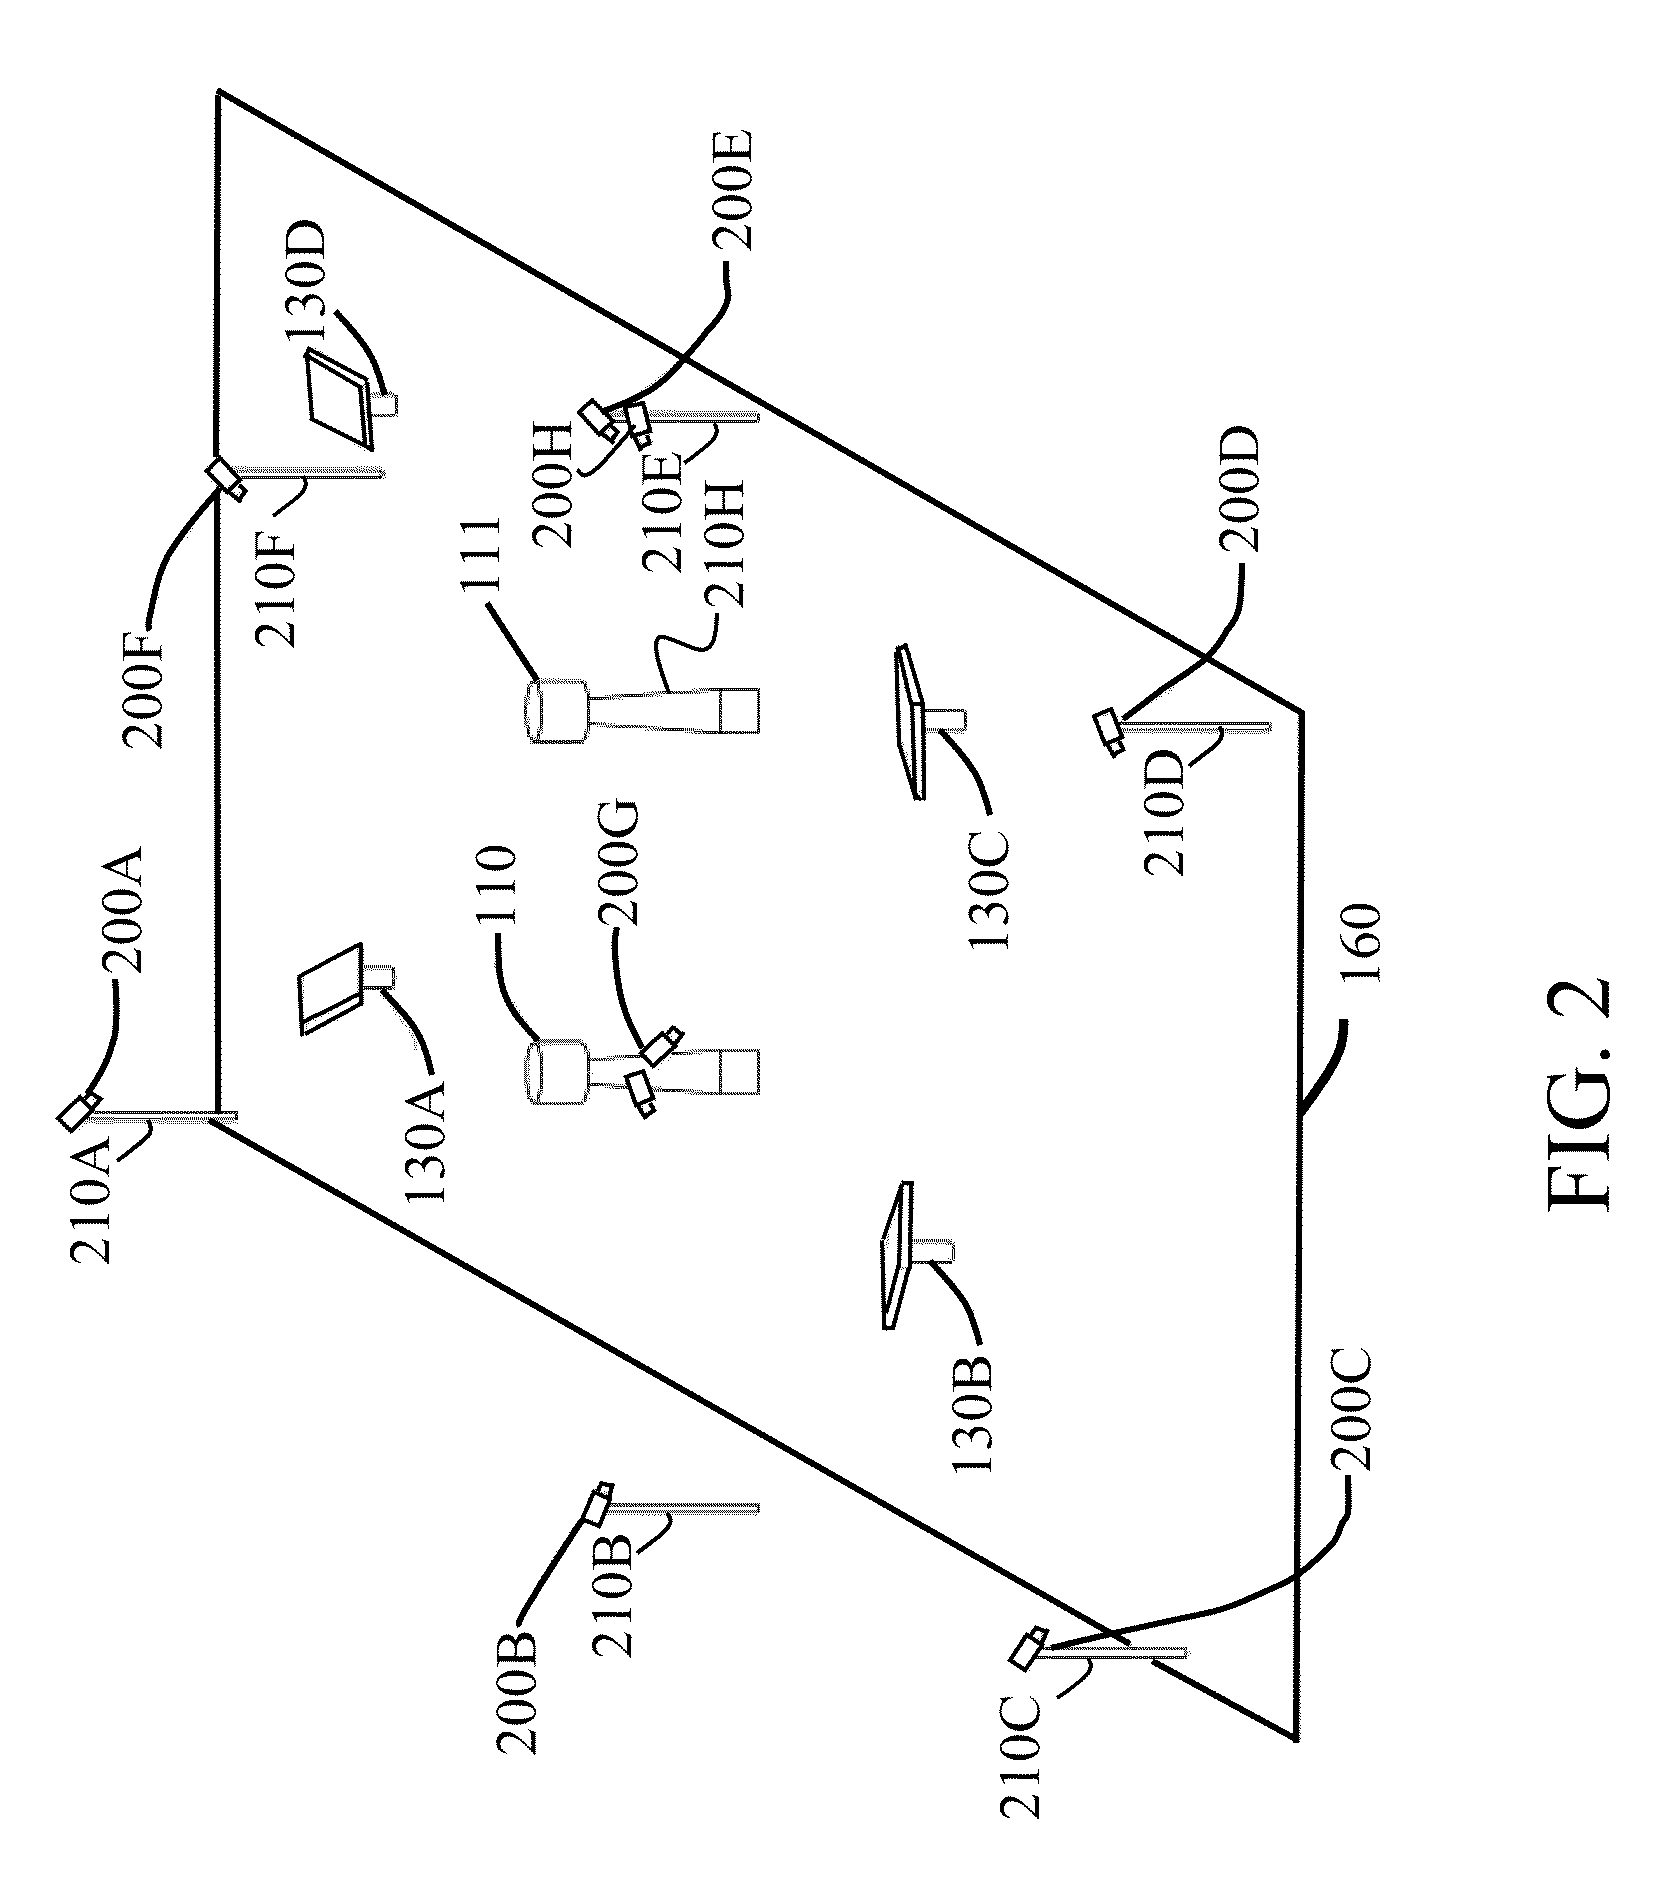 Camera-based heliostat calibration with artificial  light sources